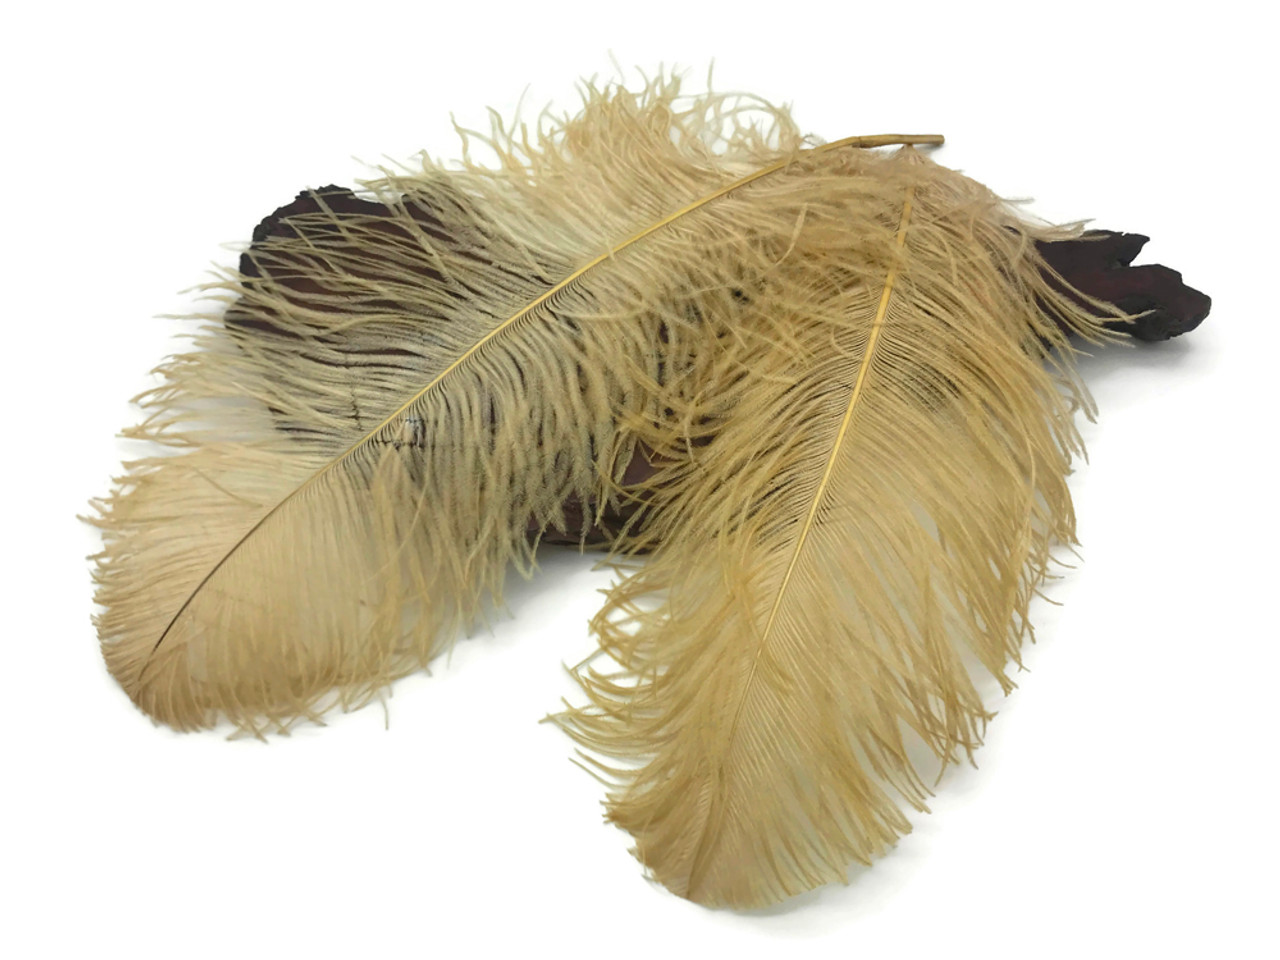 1/2 Lb. - 18-24 Old Gold Large Ostrich Wing Plume Wholesale Feathers (Bulk)